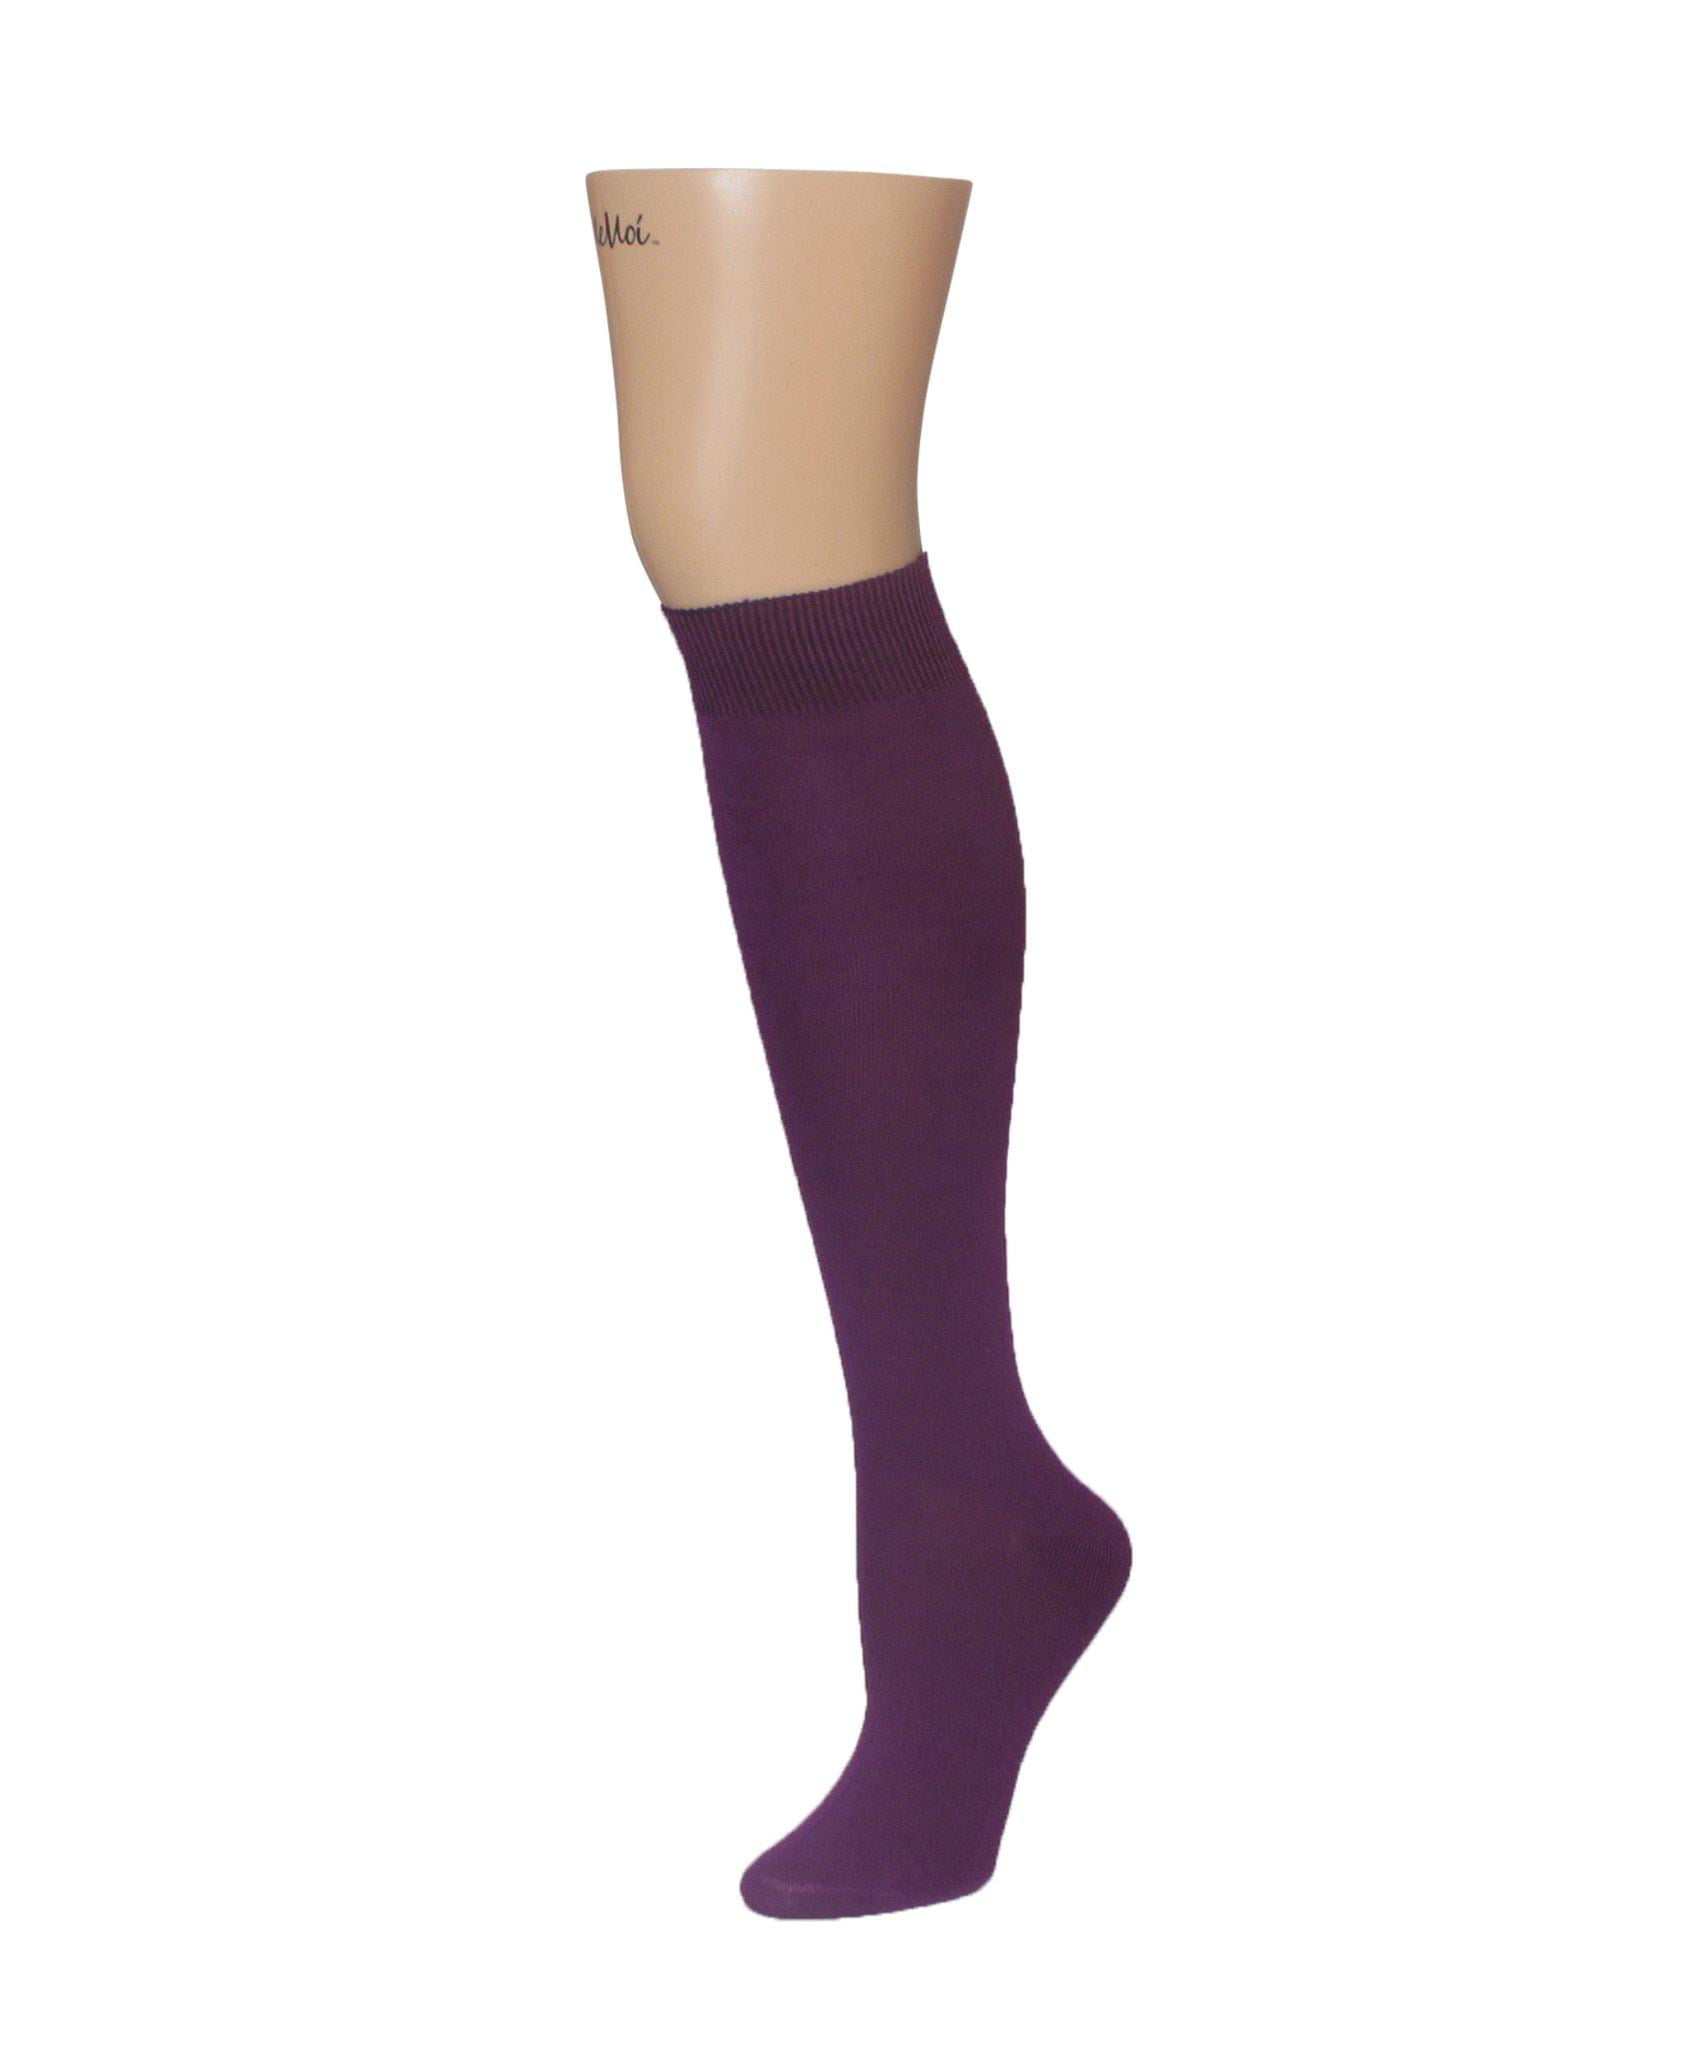 MeMoi Bamboo Blend Solid Knit Knee High Socks One Size / ML-515 Violet ...